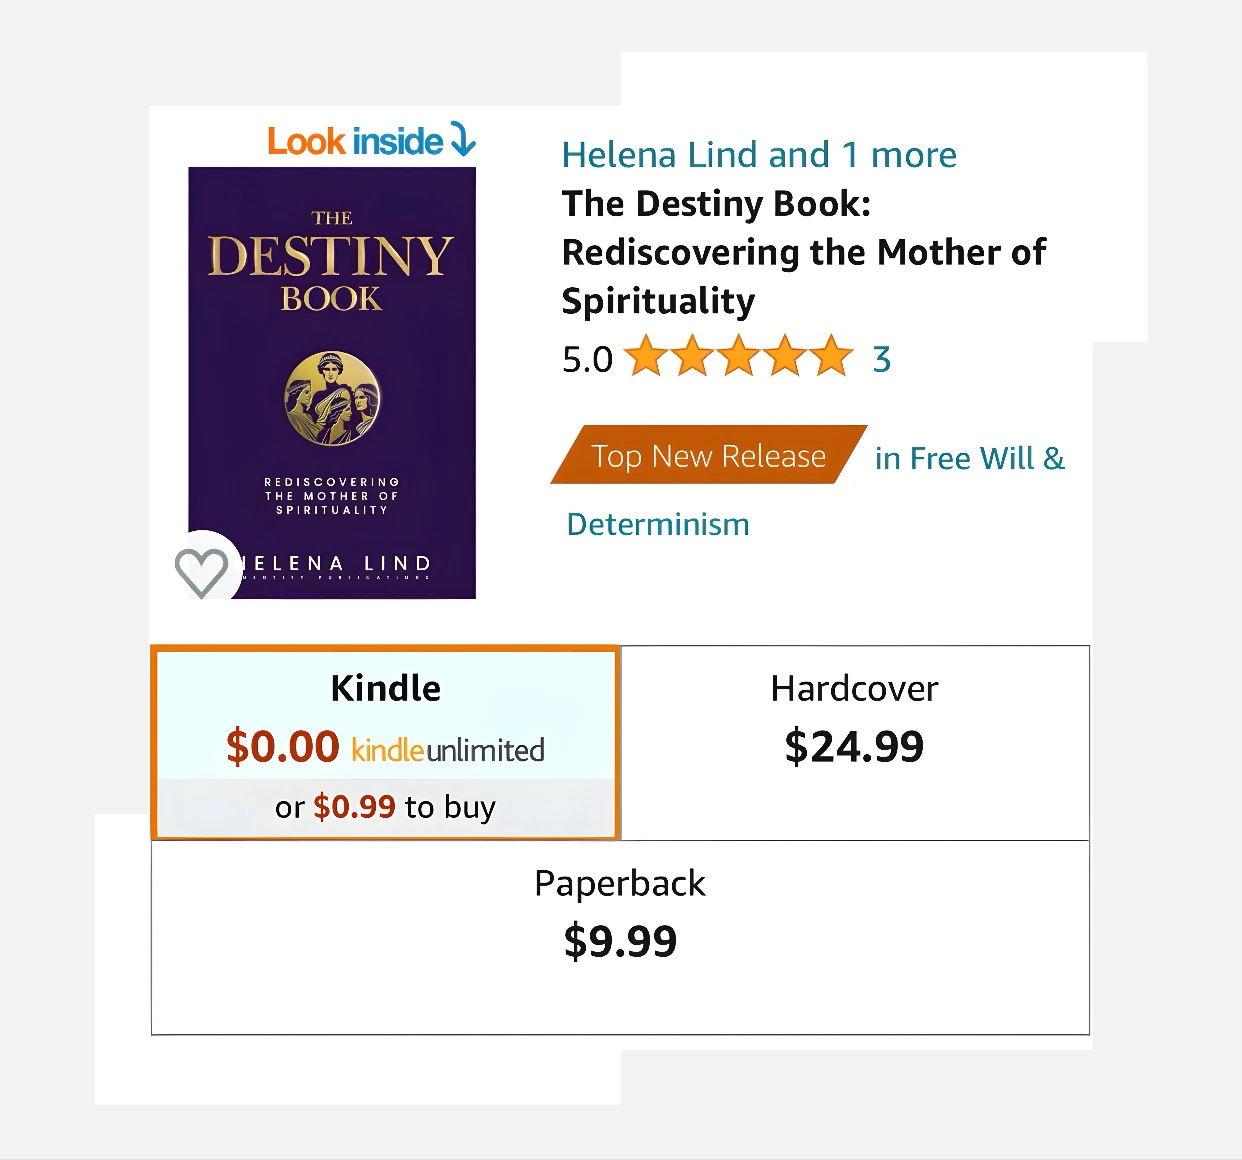 The Destiny Book is live on most global platforms